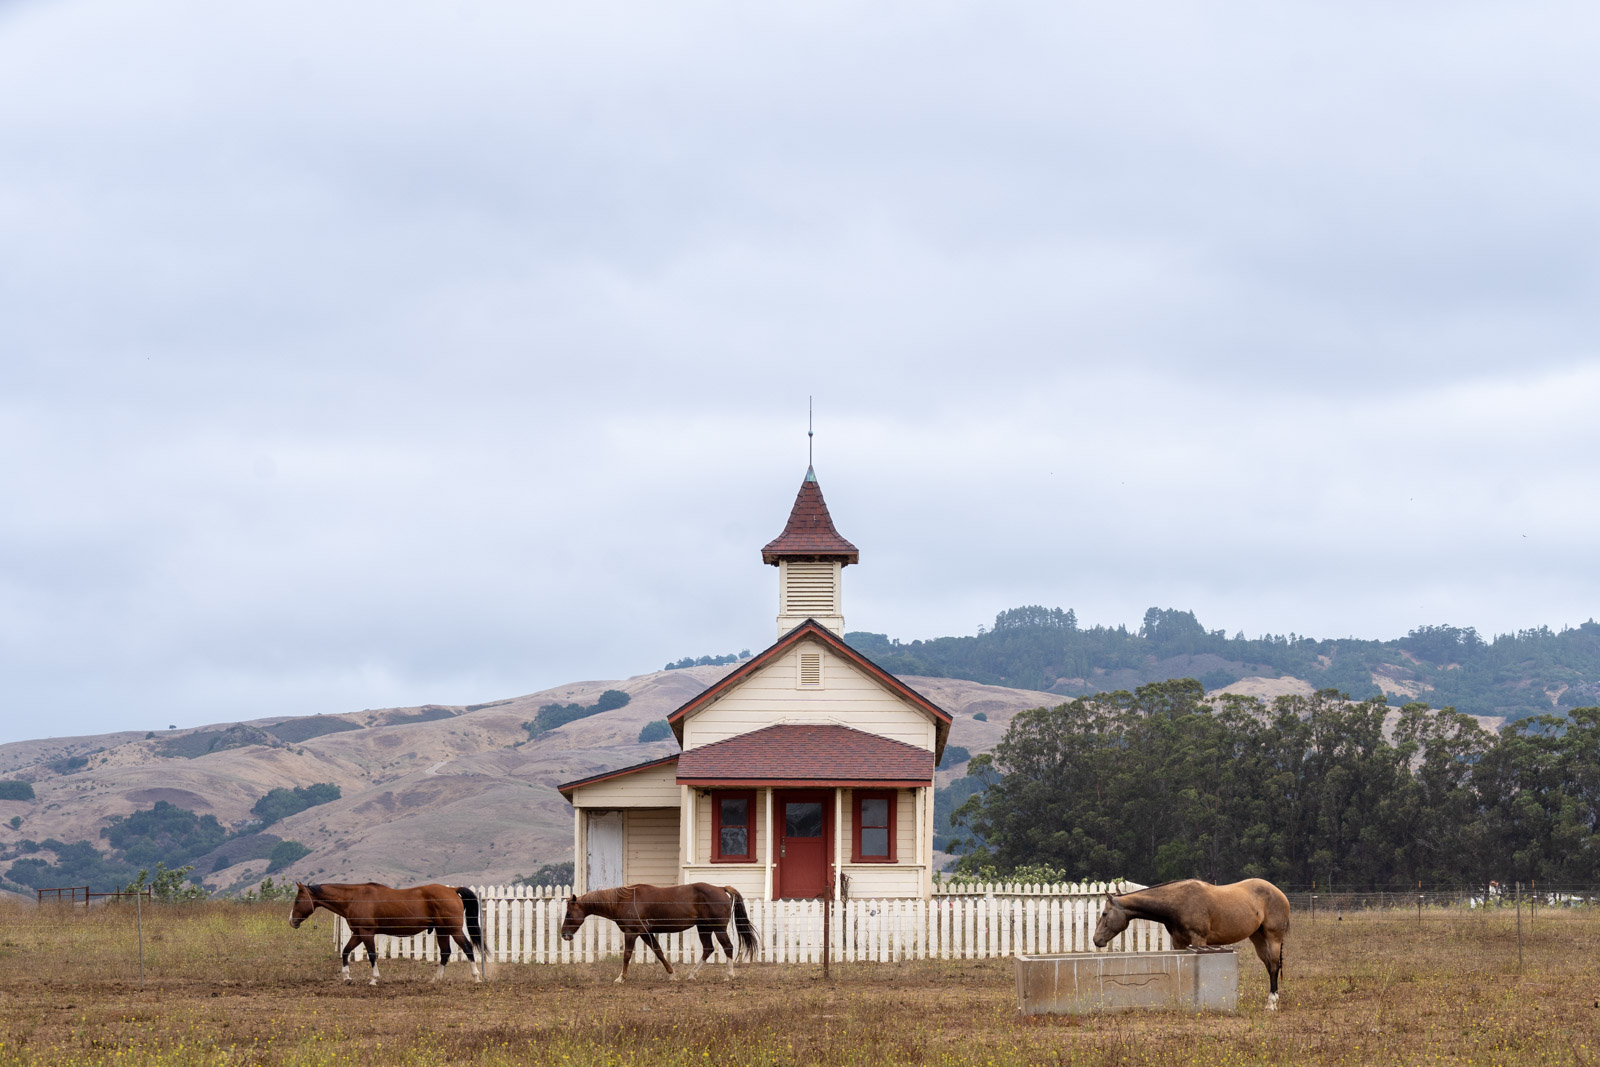 A red roofed schoolhouse in Old San Simeon, with a white picket fence, and three horses in front.